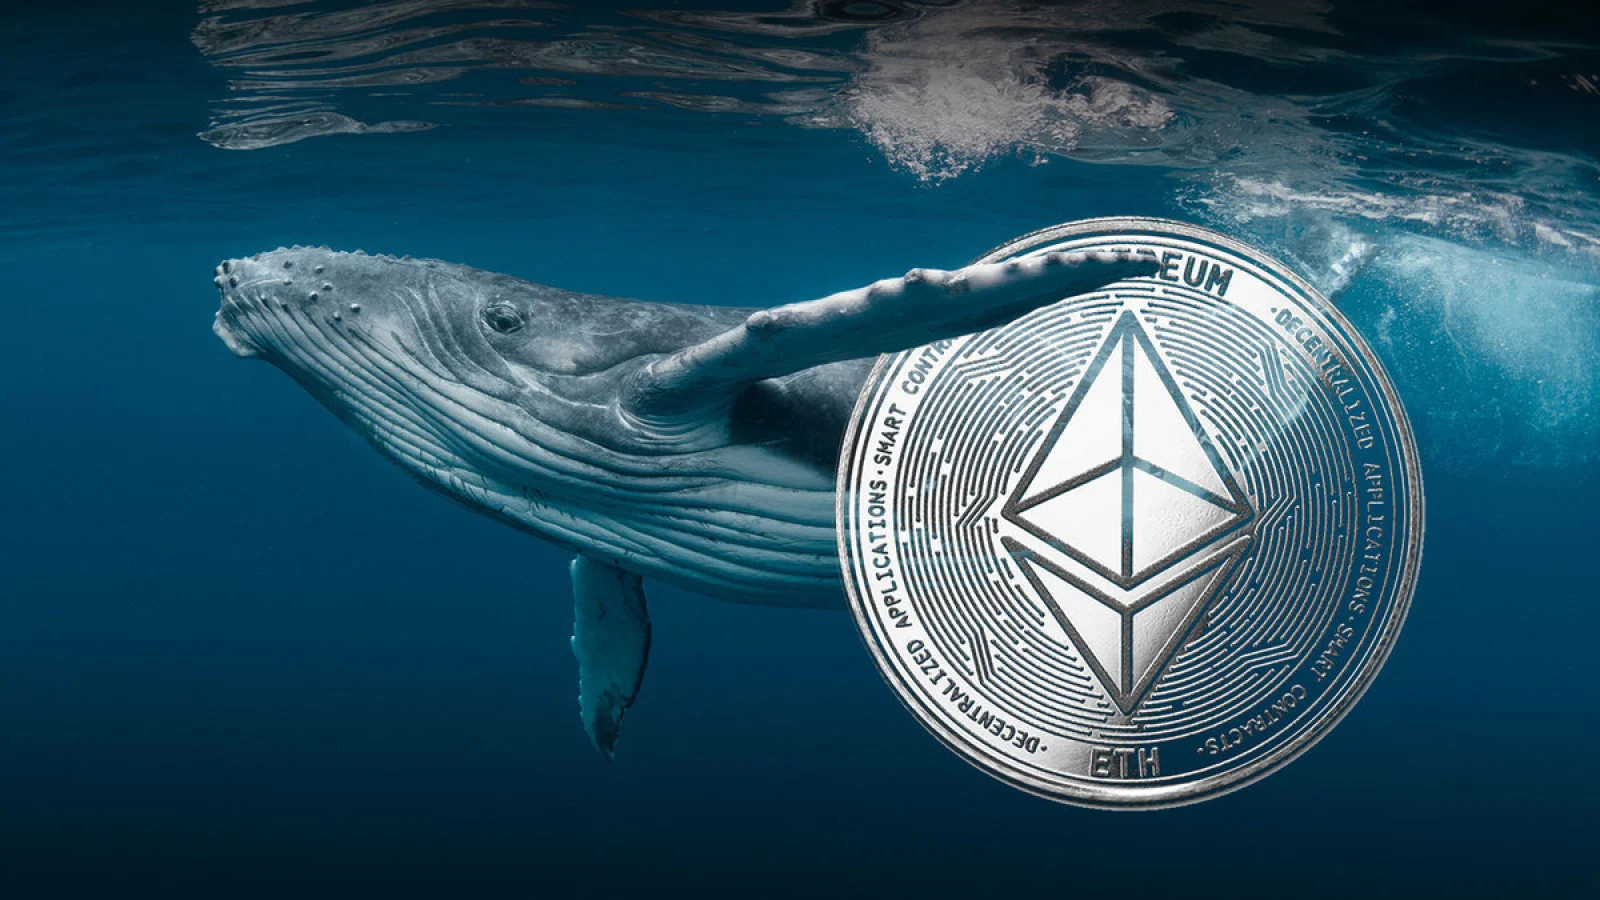 The Huge Ethereum Whale Keeps Selling, Moving 5,040 ETH